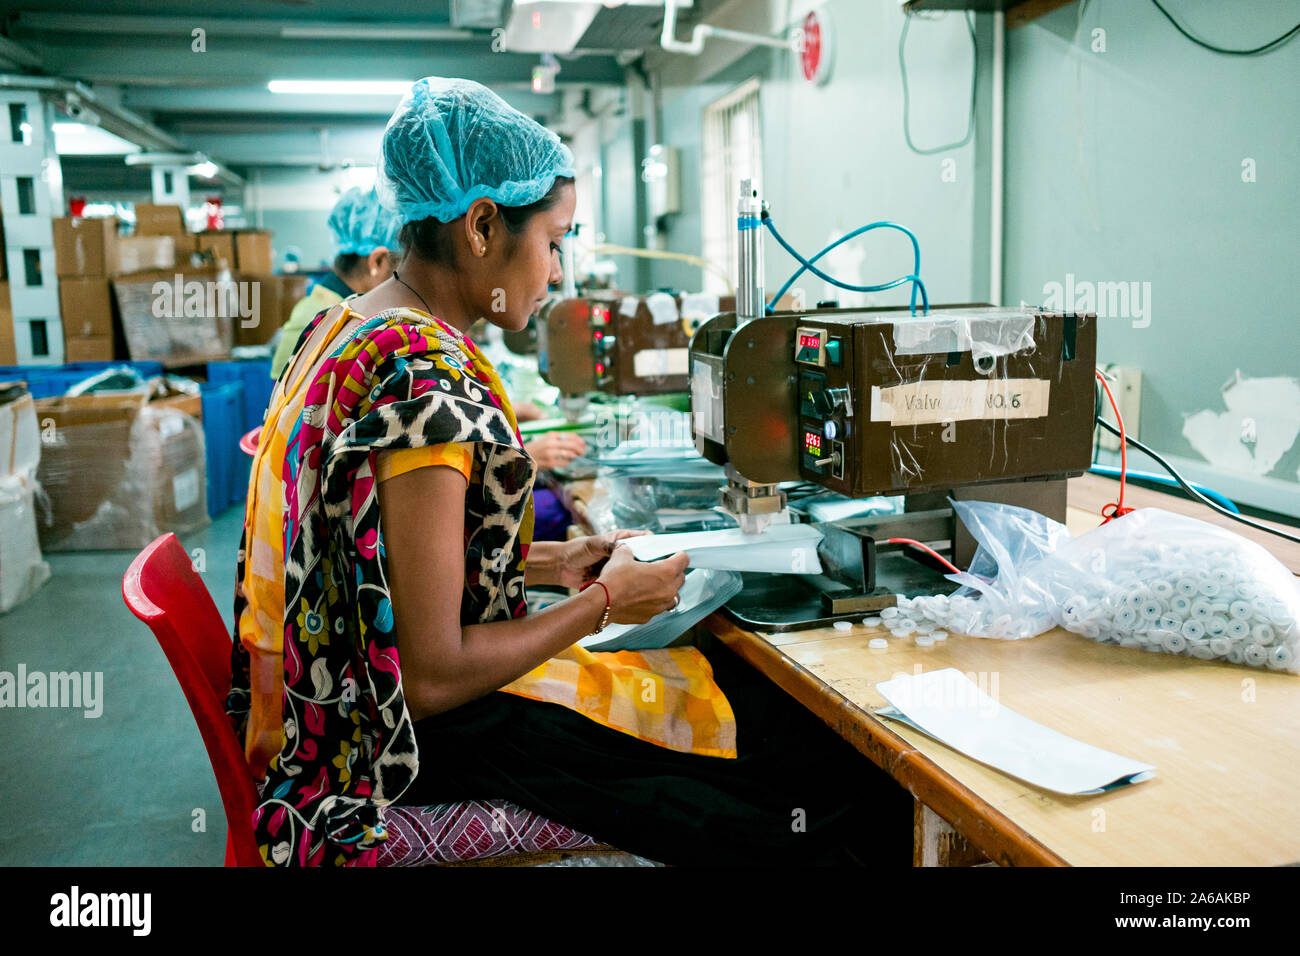 New delhi, India - 10 september 2019: an  indian woman at work using industrial equipment inside packaging manufacturing plant with serene expression Stock Photo